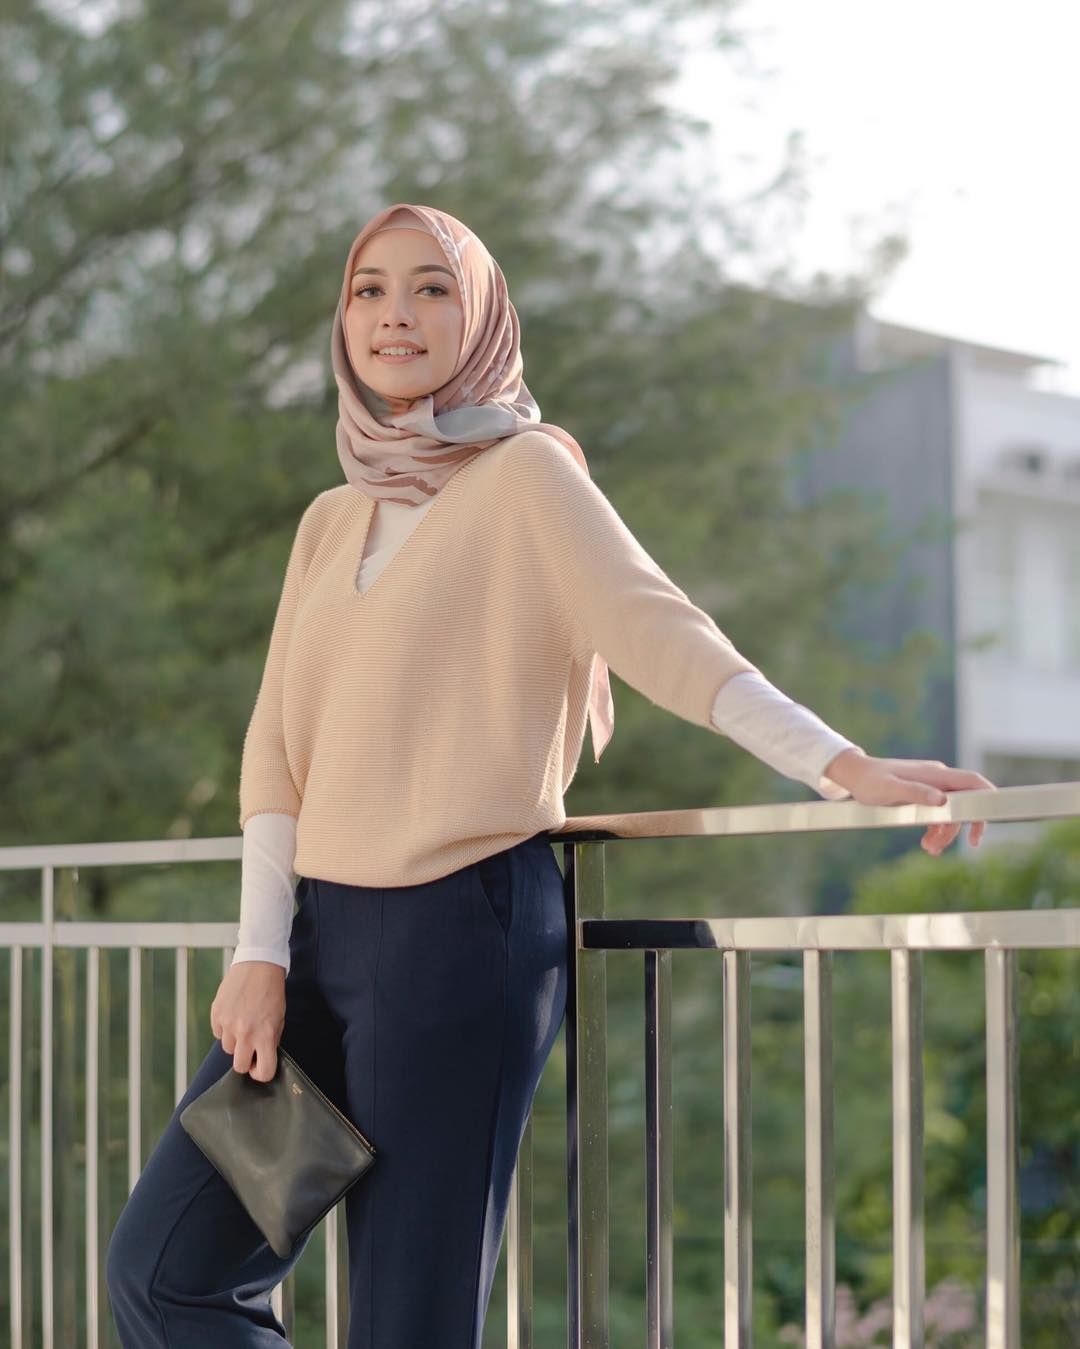 From Monochrome Colors to Batik, Here's Hijab For The Office